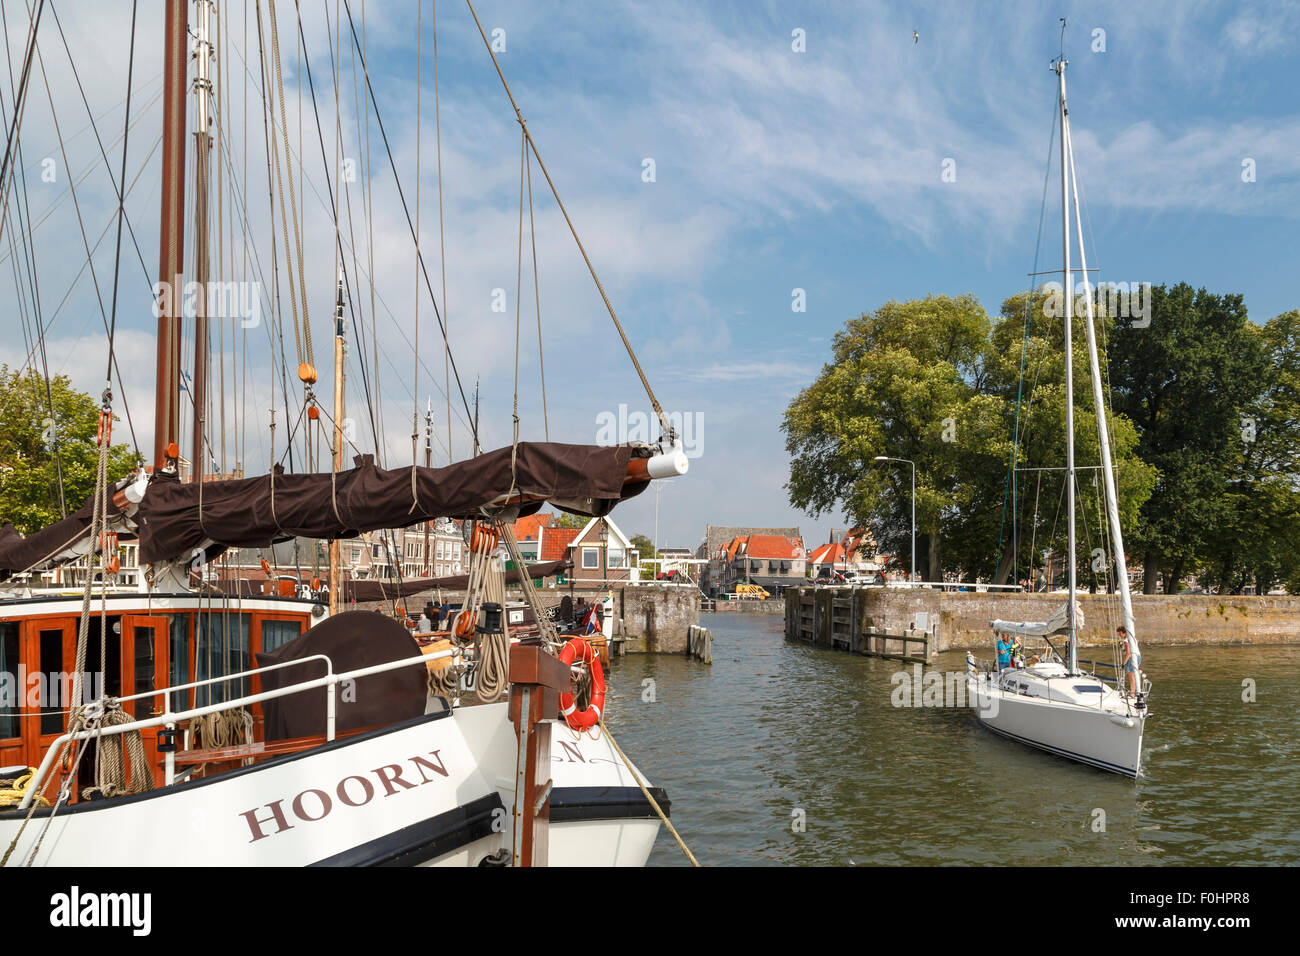 Maritime mood along the IJsselmeer in the port of Hoorn (Horn),  North Holland, The Netherlands. Stock Photo